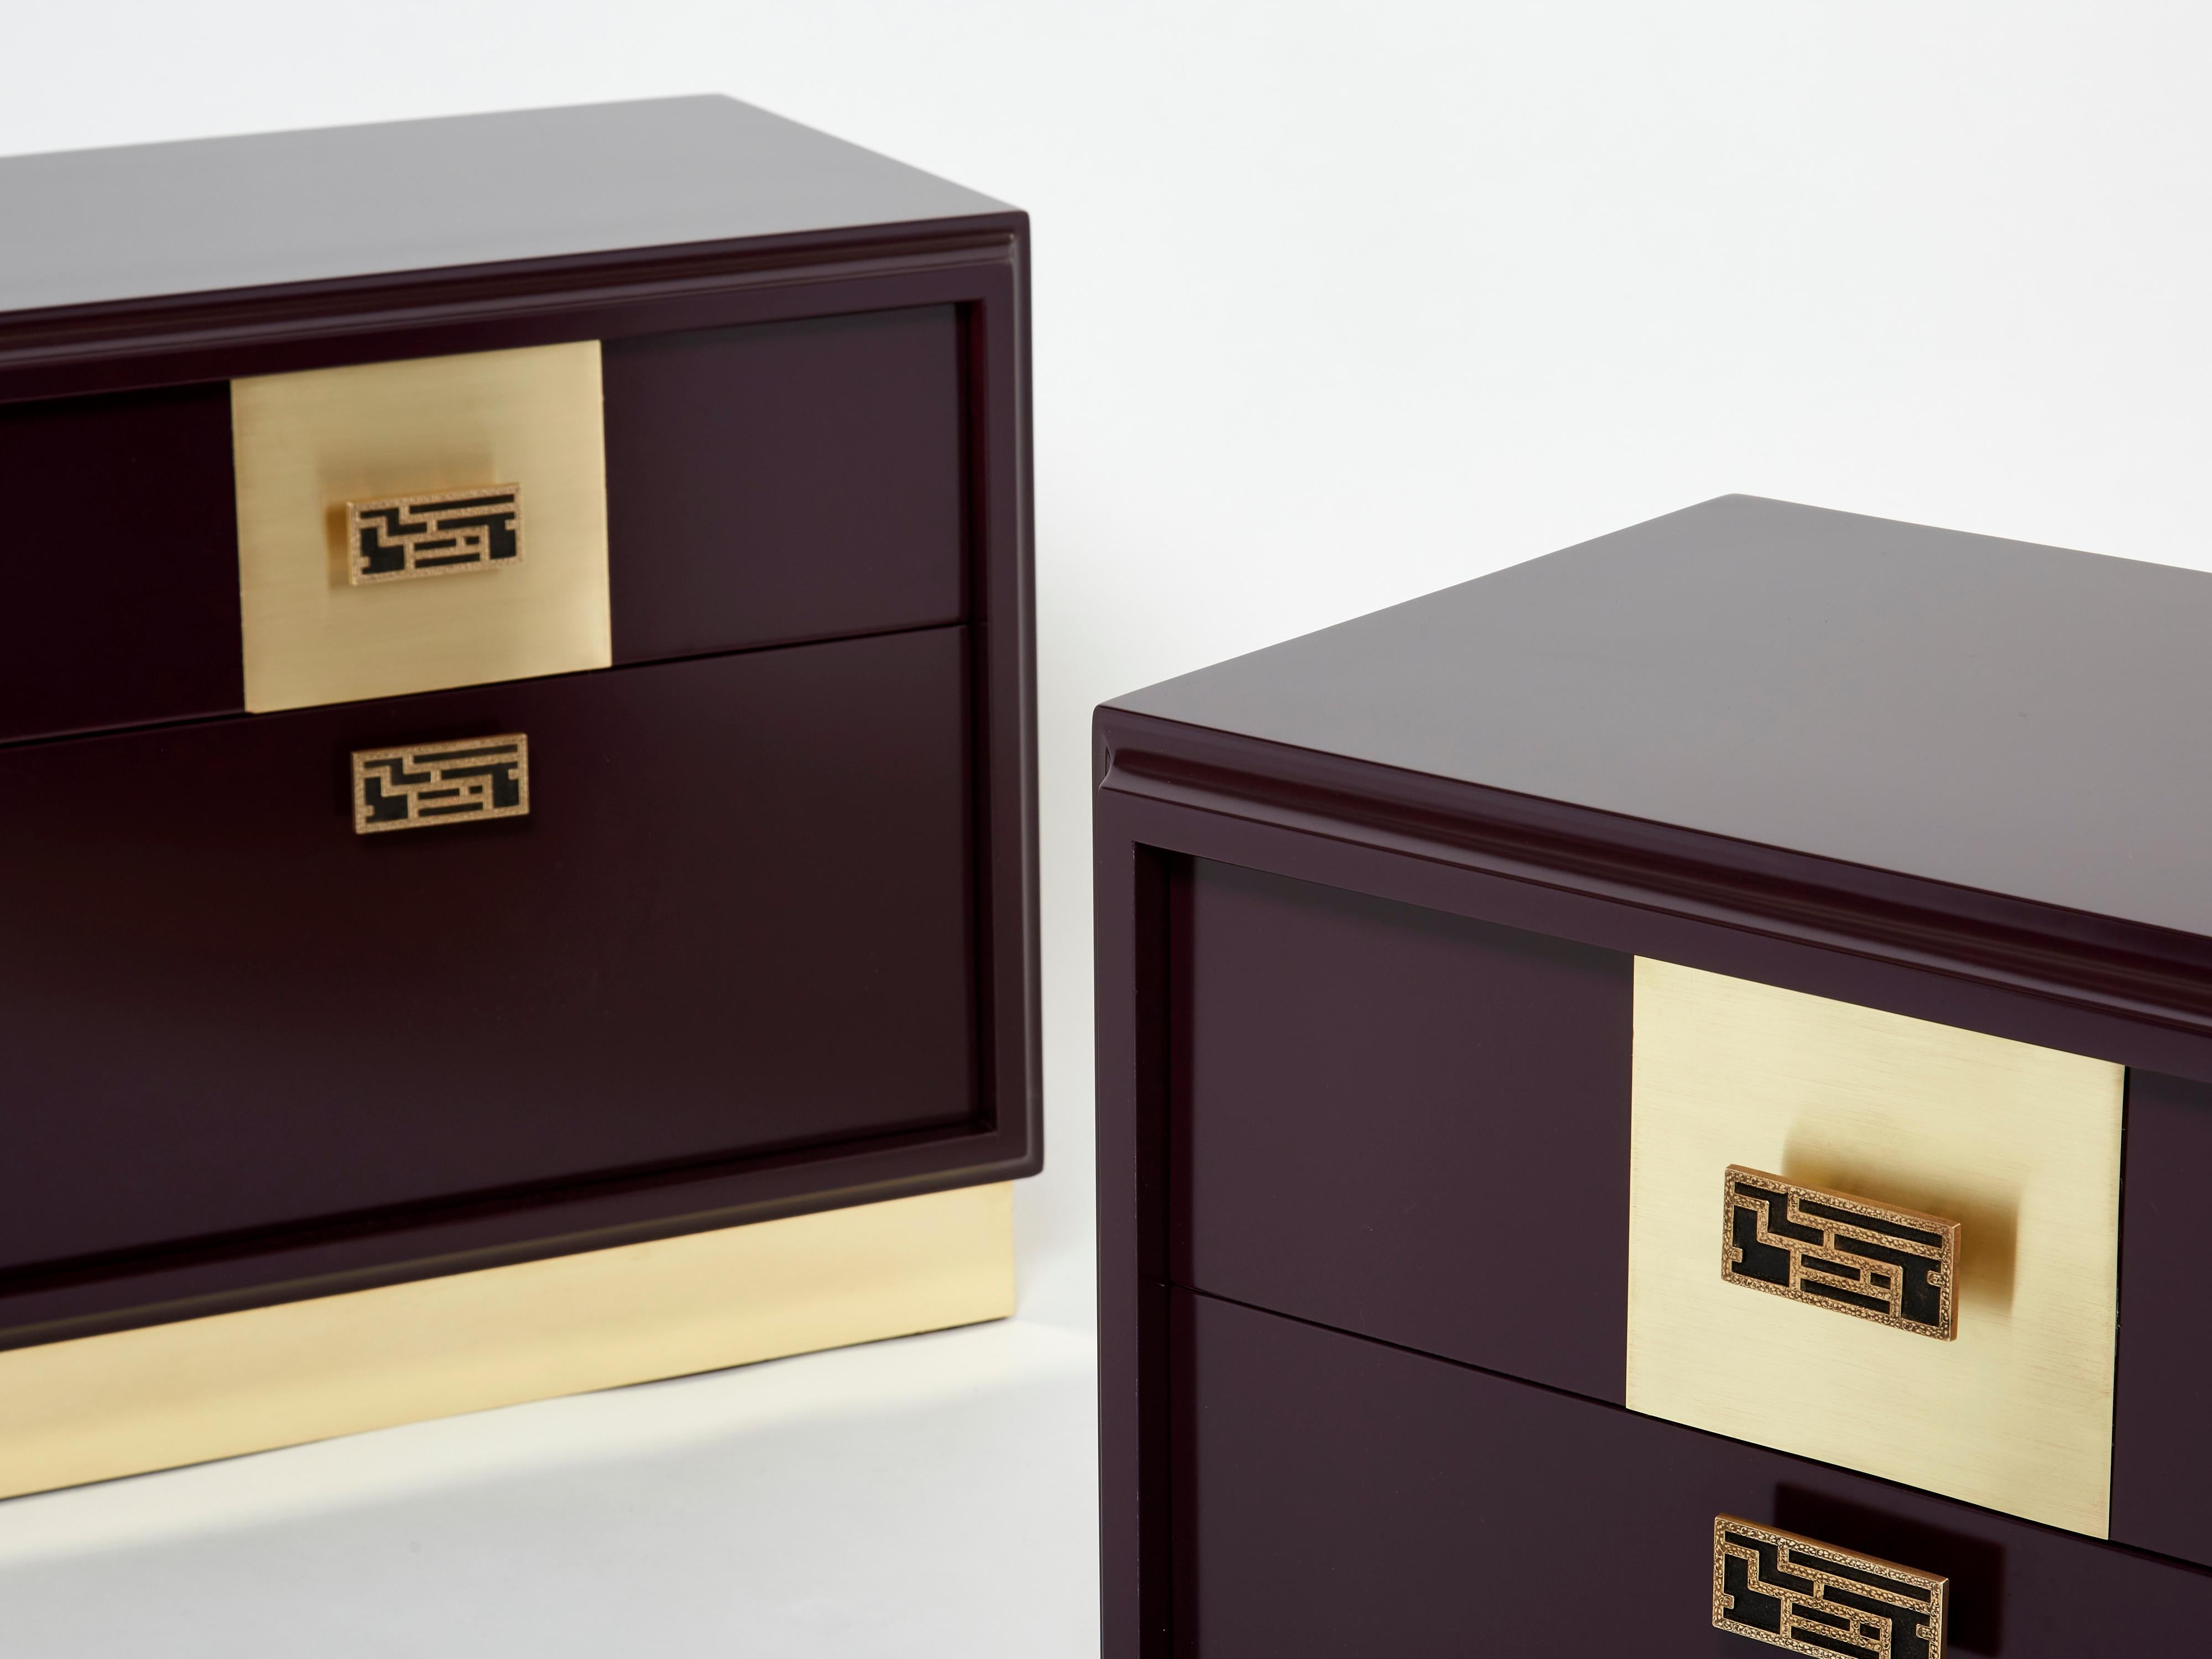 This rare pair of Italian midcentury plum prune lacquered nightstands would be stunning in any bedroom. Designed by Luciano Frigerio for Frigerio Di Desio in Italy in the late 1970s, the satin plum lacquer paired with the mix of polished and brushed